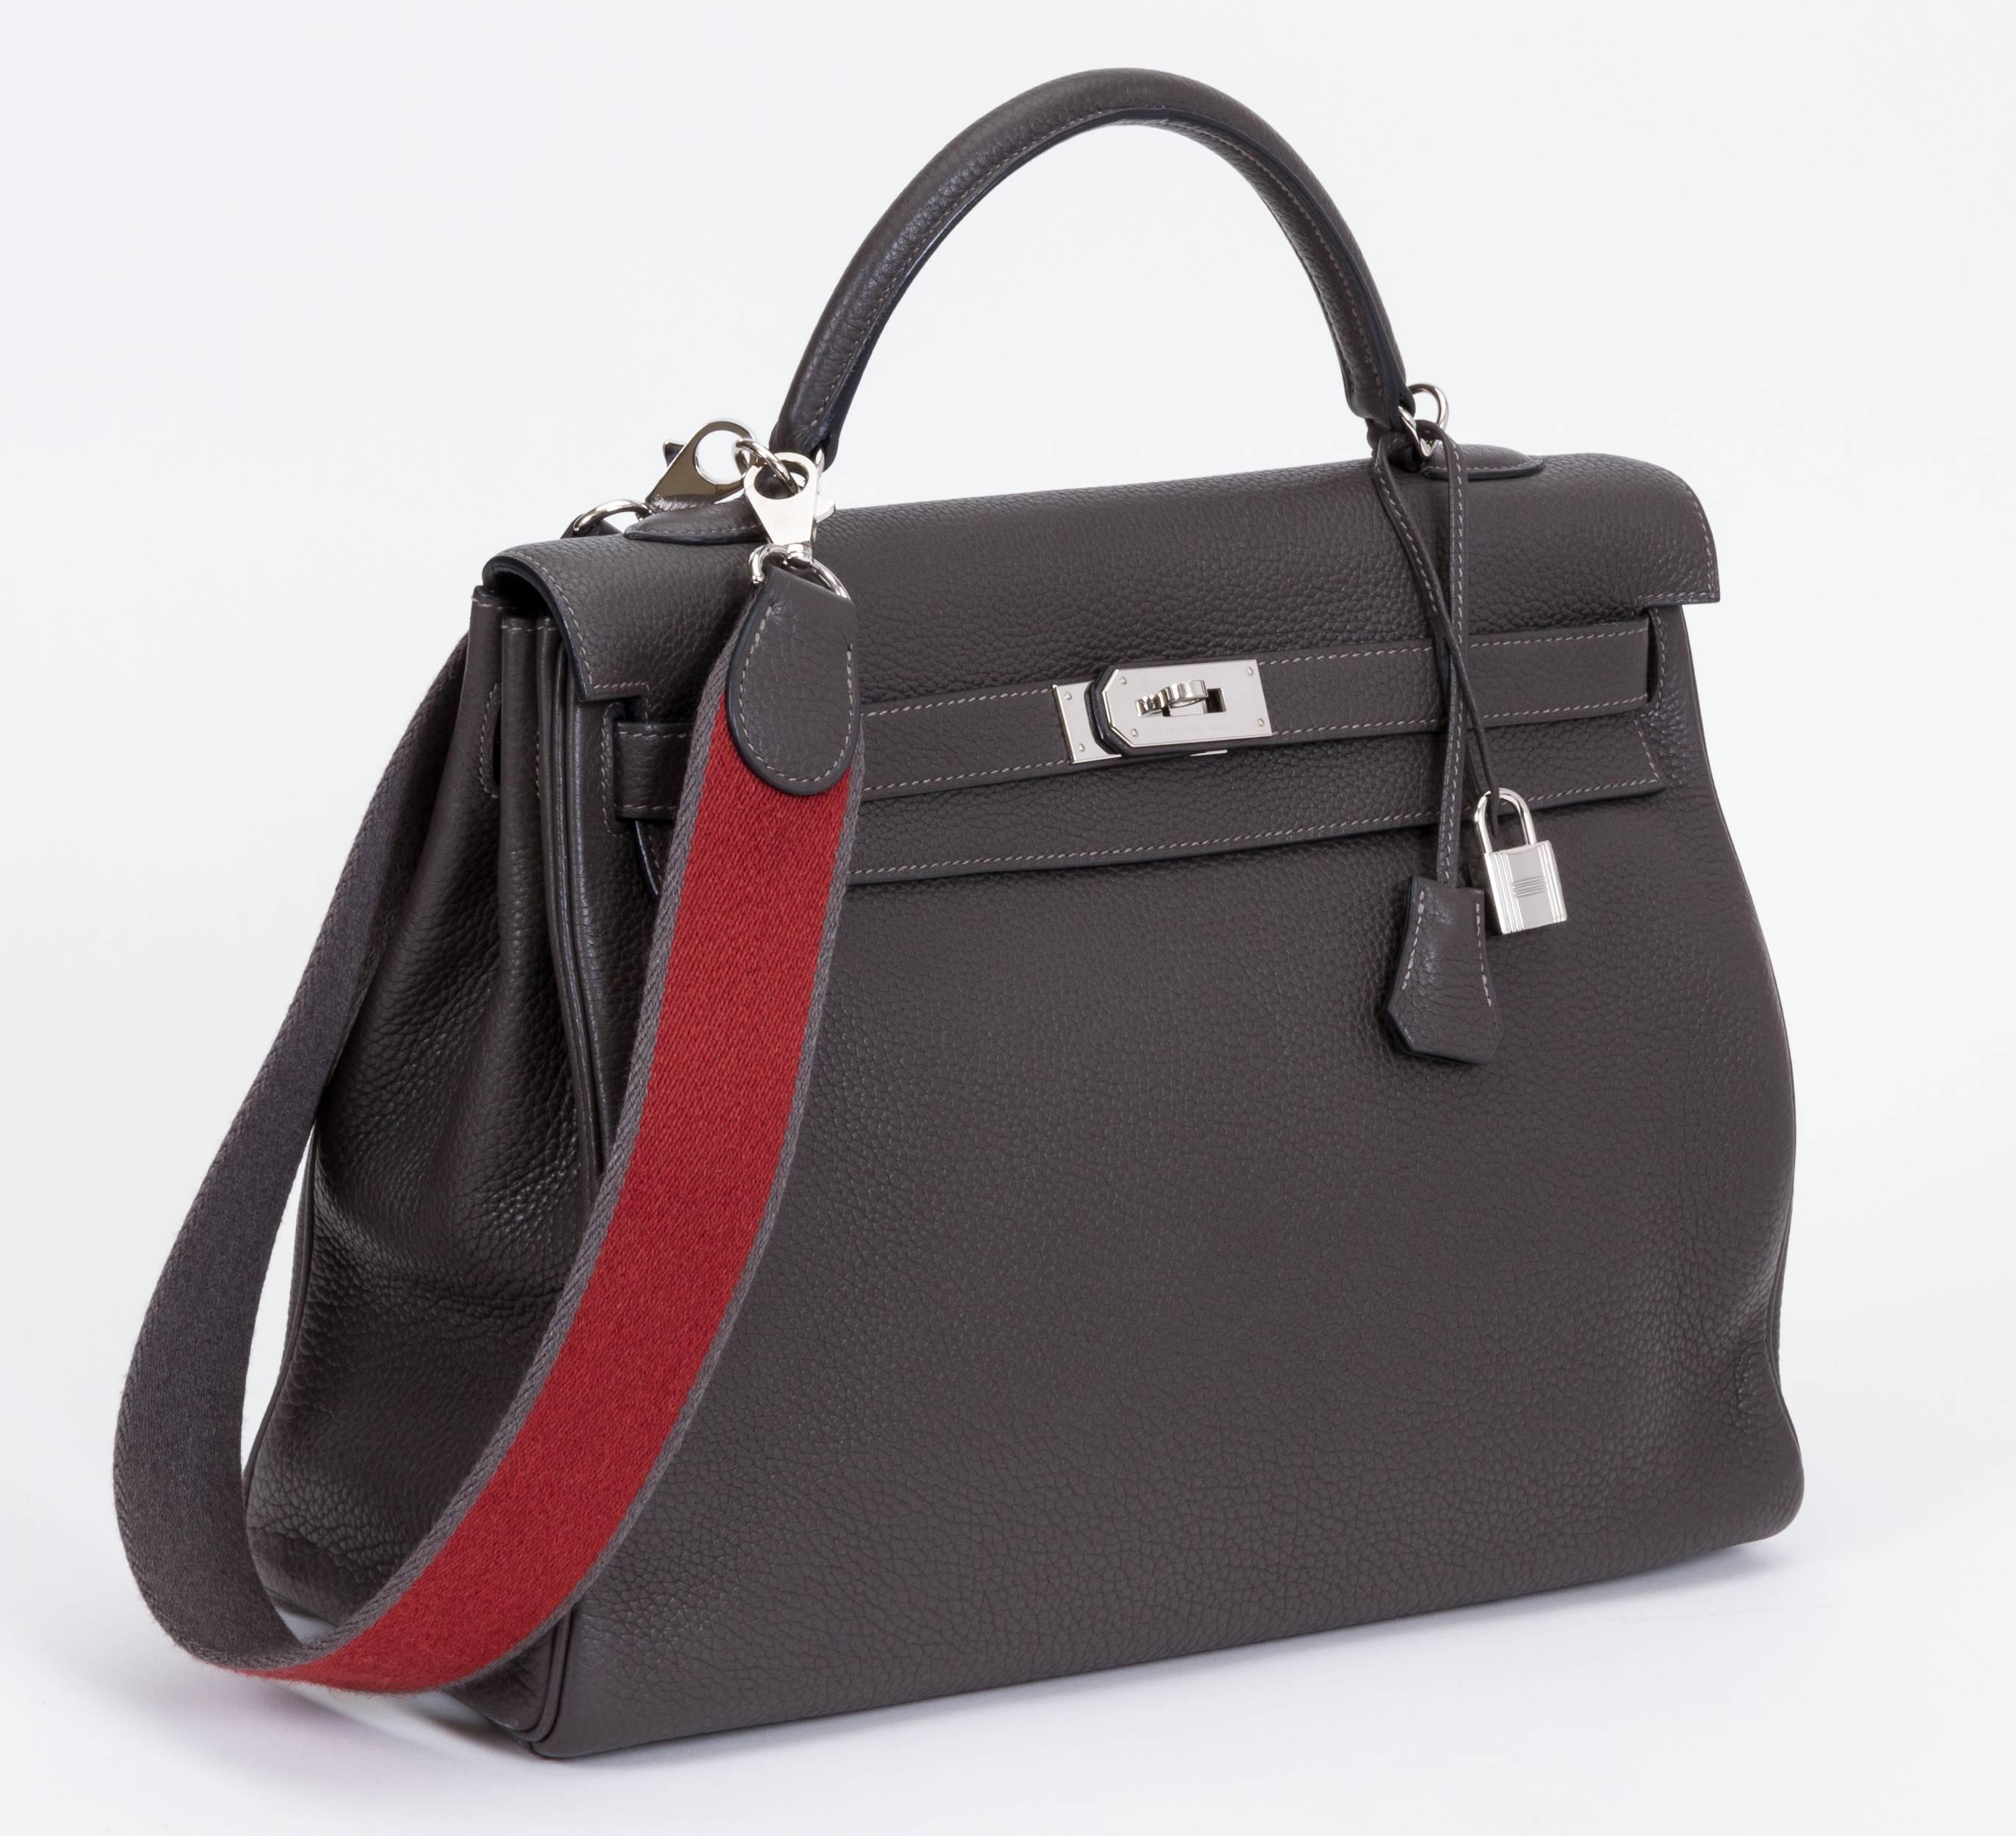 Hermès Kelly bag in graphite clemence leather and palladium hardware. 40cm. Detachable strap in two-tone graphite and burgundy included. Handle drop, 4